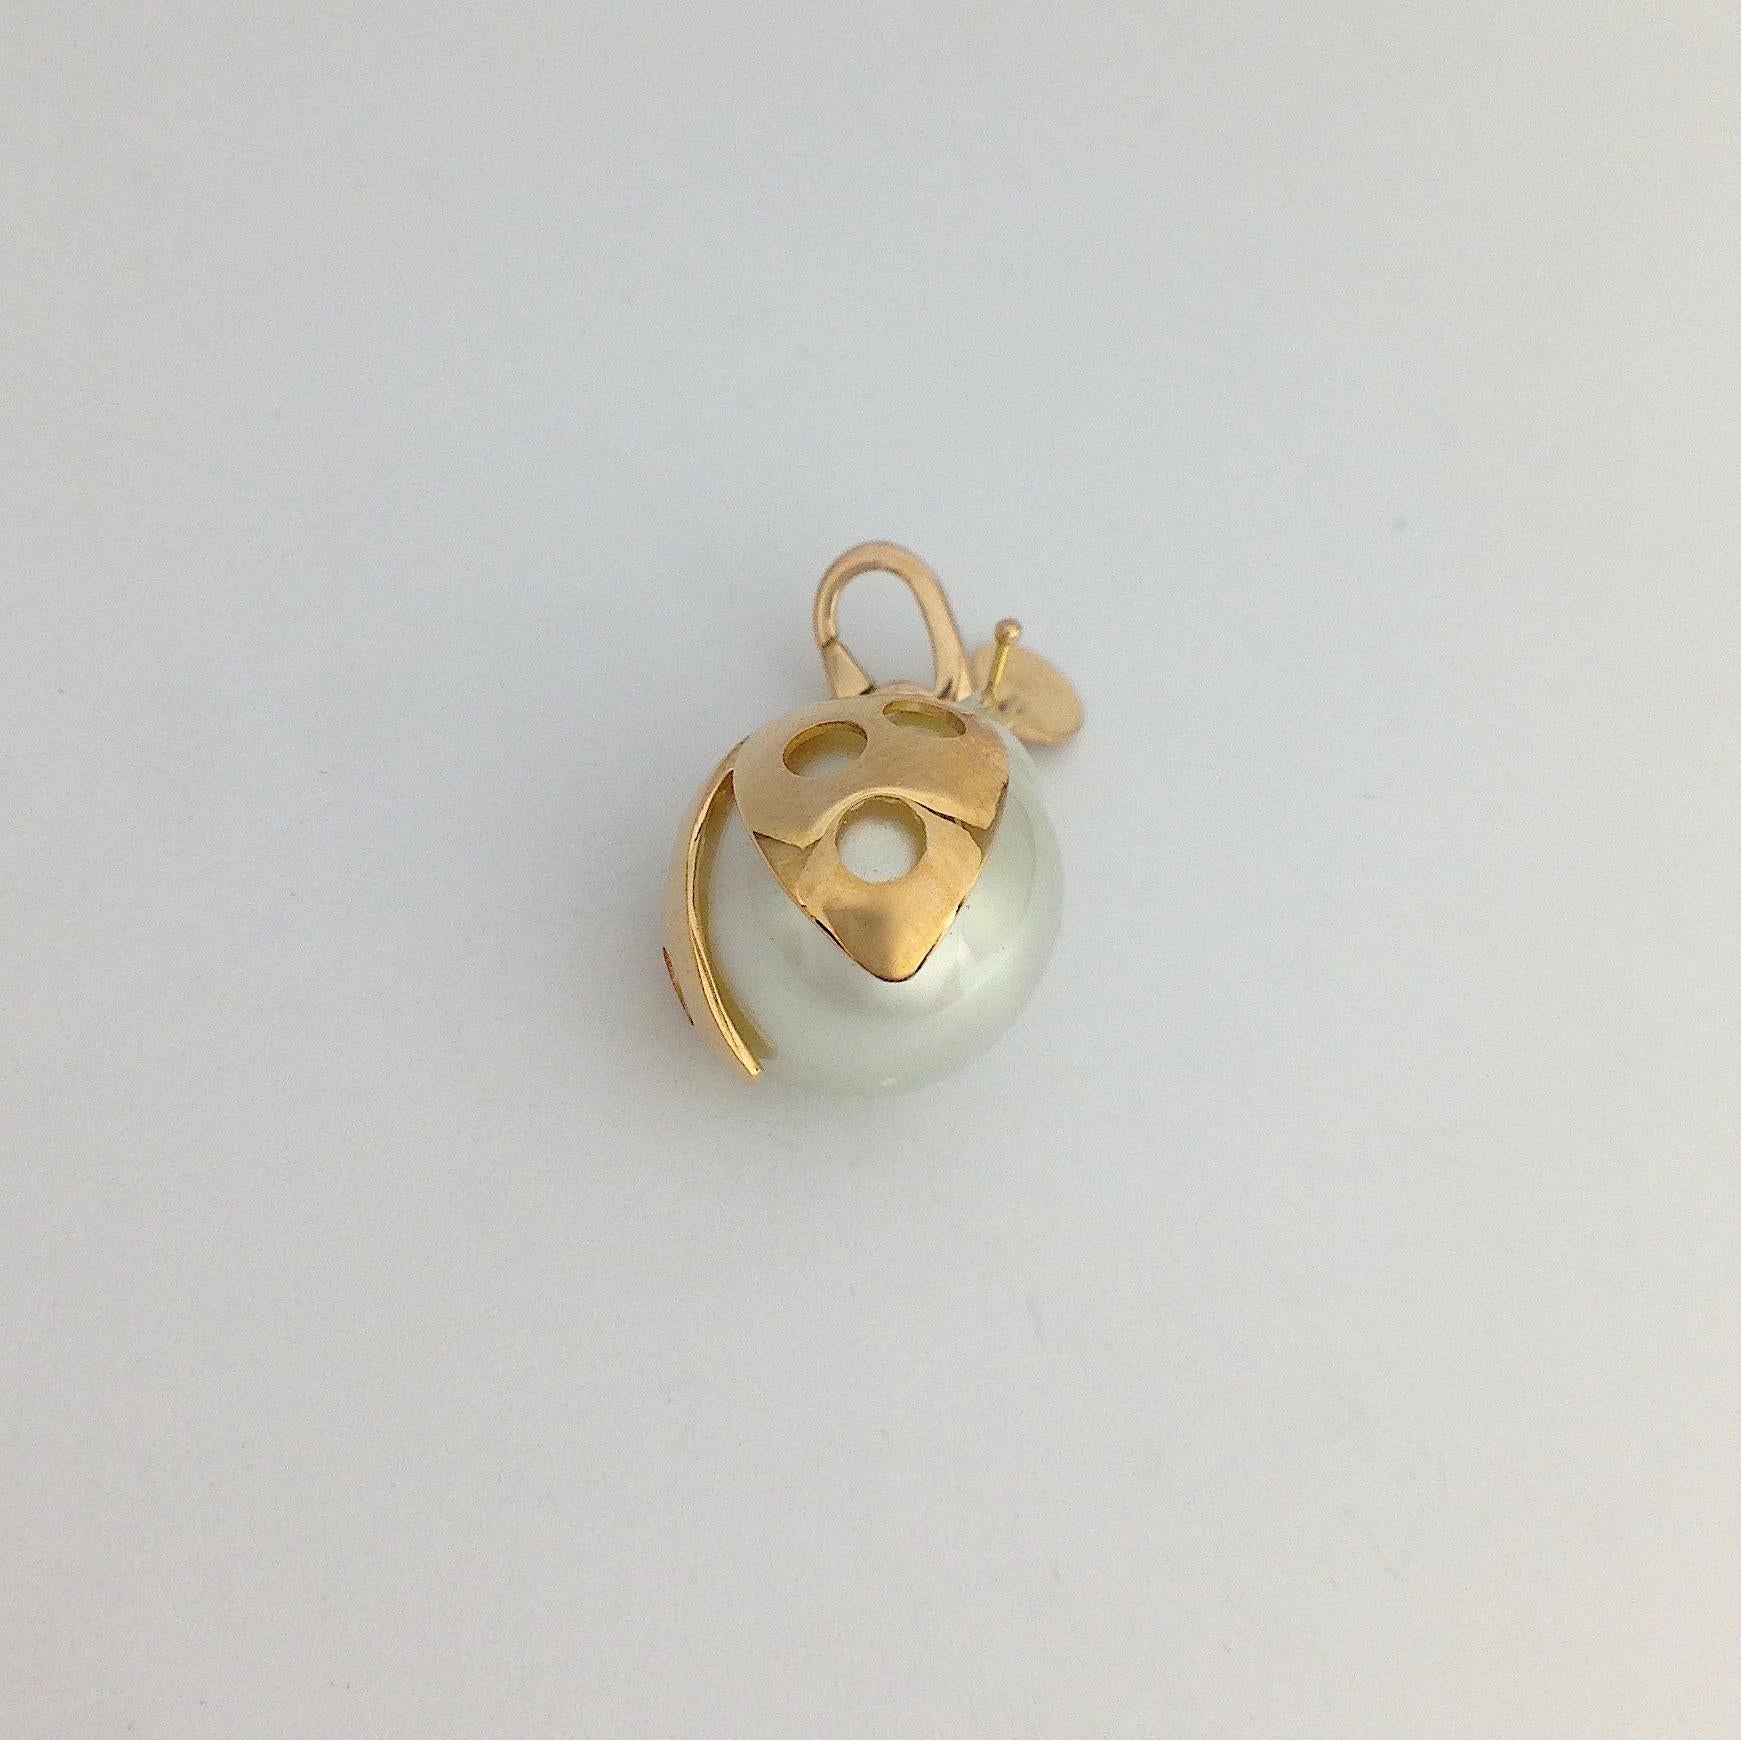 A very beautiful Australian pearl has been carefully crafted to make a ladybug, It is often used as a lucky charm. 
The ring for the necklace is a carabiner so it can be worn also as a beautiful charm on a bracelet.  
The gold is red.
The diameter